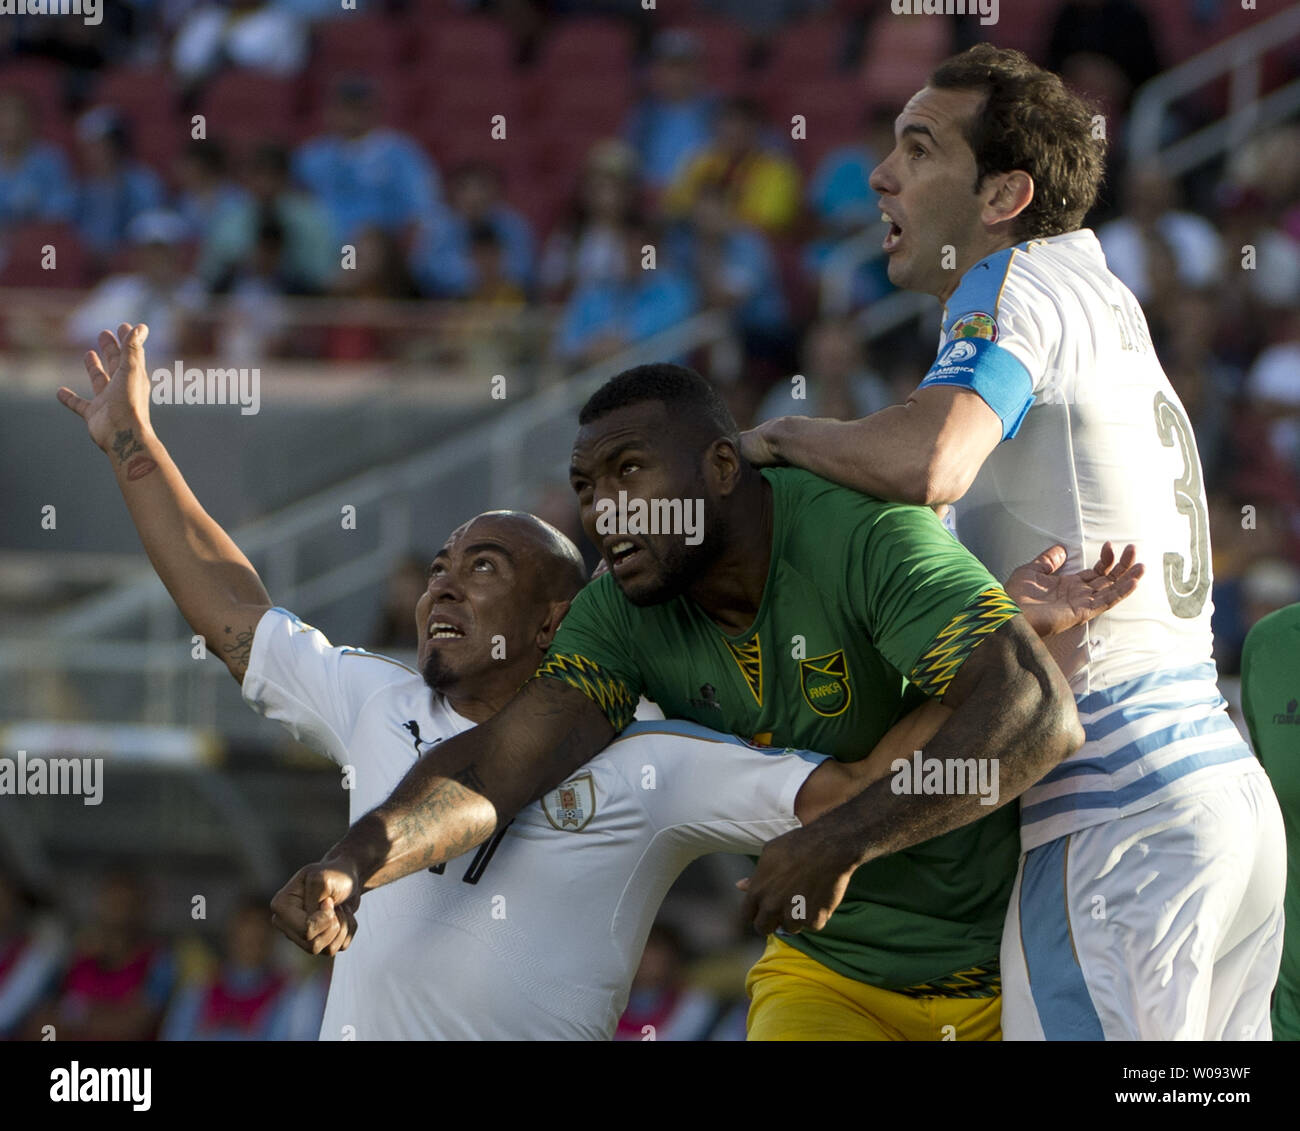 Jamaica's Westley Morgan (C) gets squeezed between Uruguay's Raul Arevlo Rios (L) and Diego Godin on a corner kick in the first half at COPA America Centenario at Levi's Stadium in Santa Clara, California on June 13,  2016.  Uruguay won 3-0.    Photo by Terry Schmitt/UPI Stock Photo